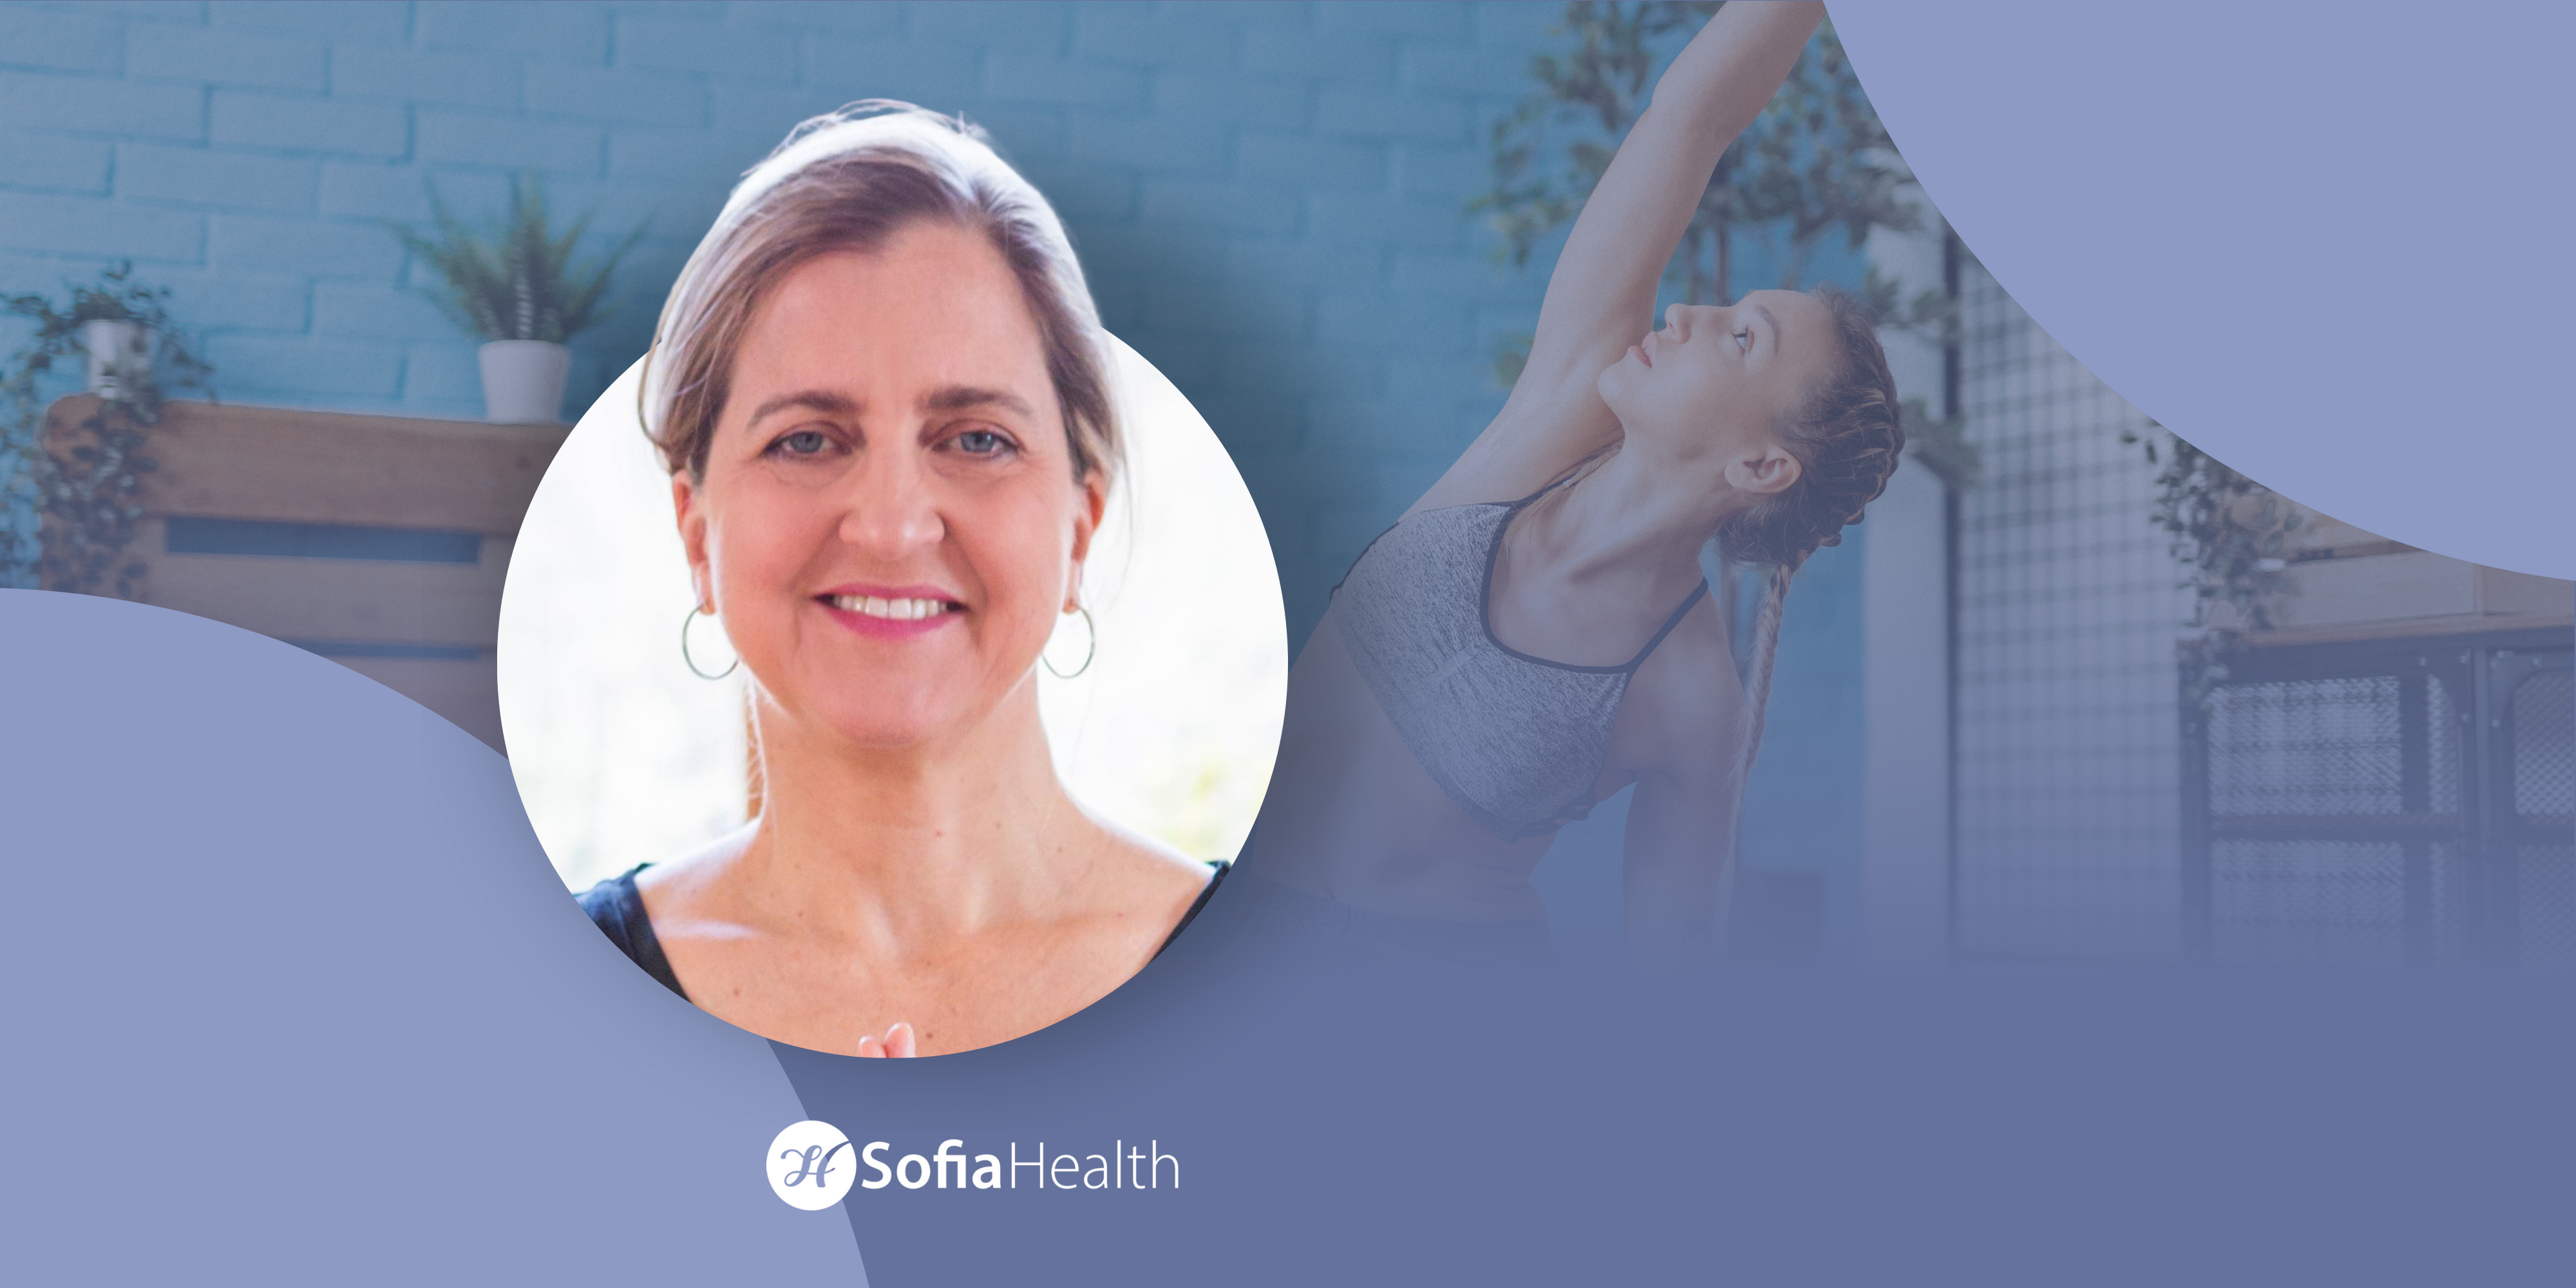 Exploring Yoga and Mindful Movement with Kristine Weber